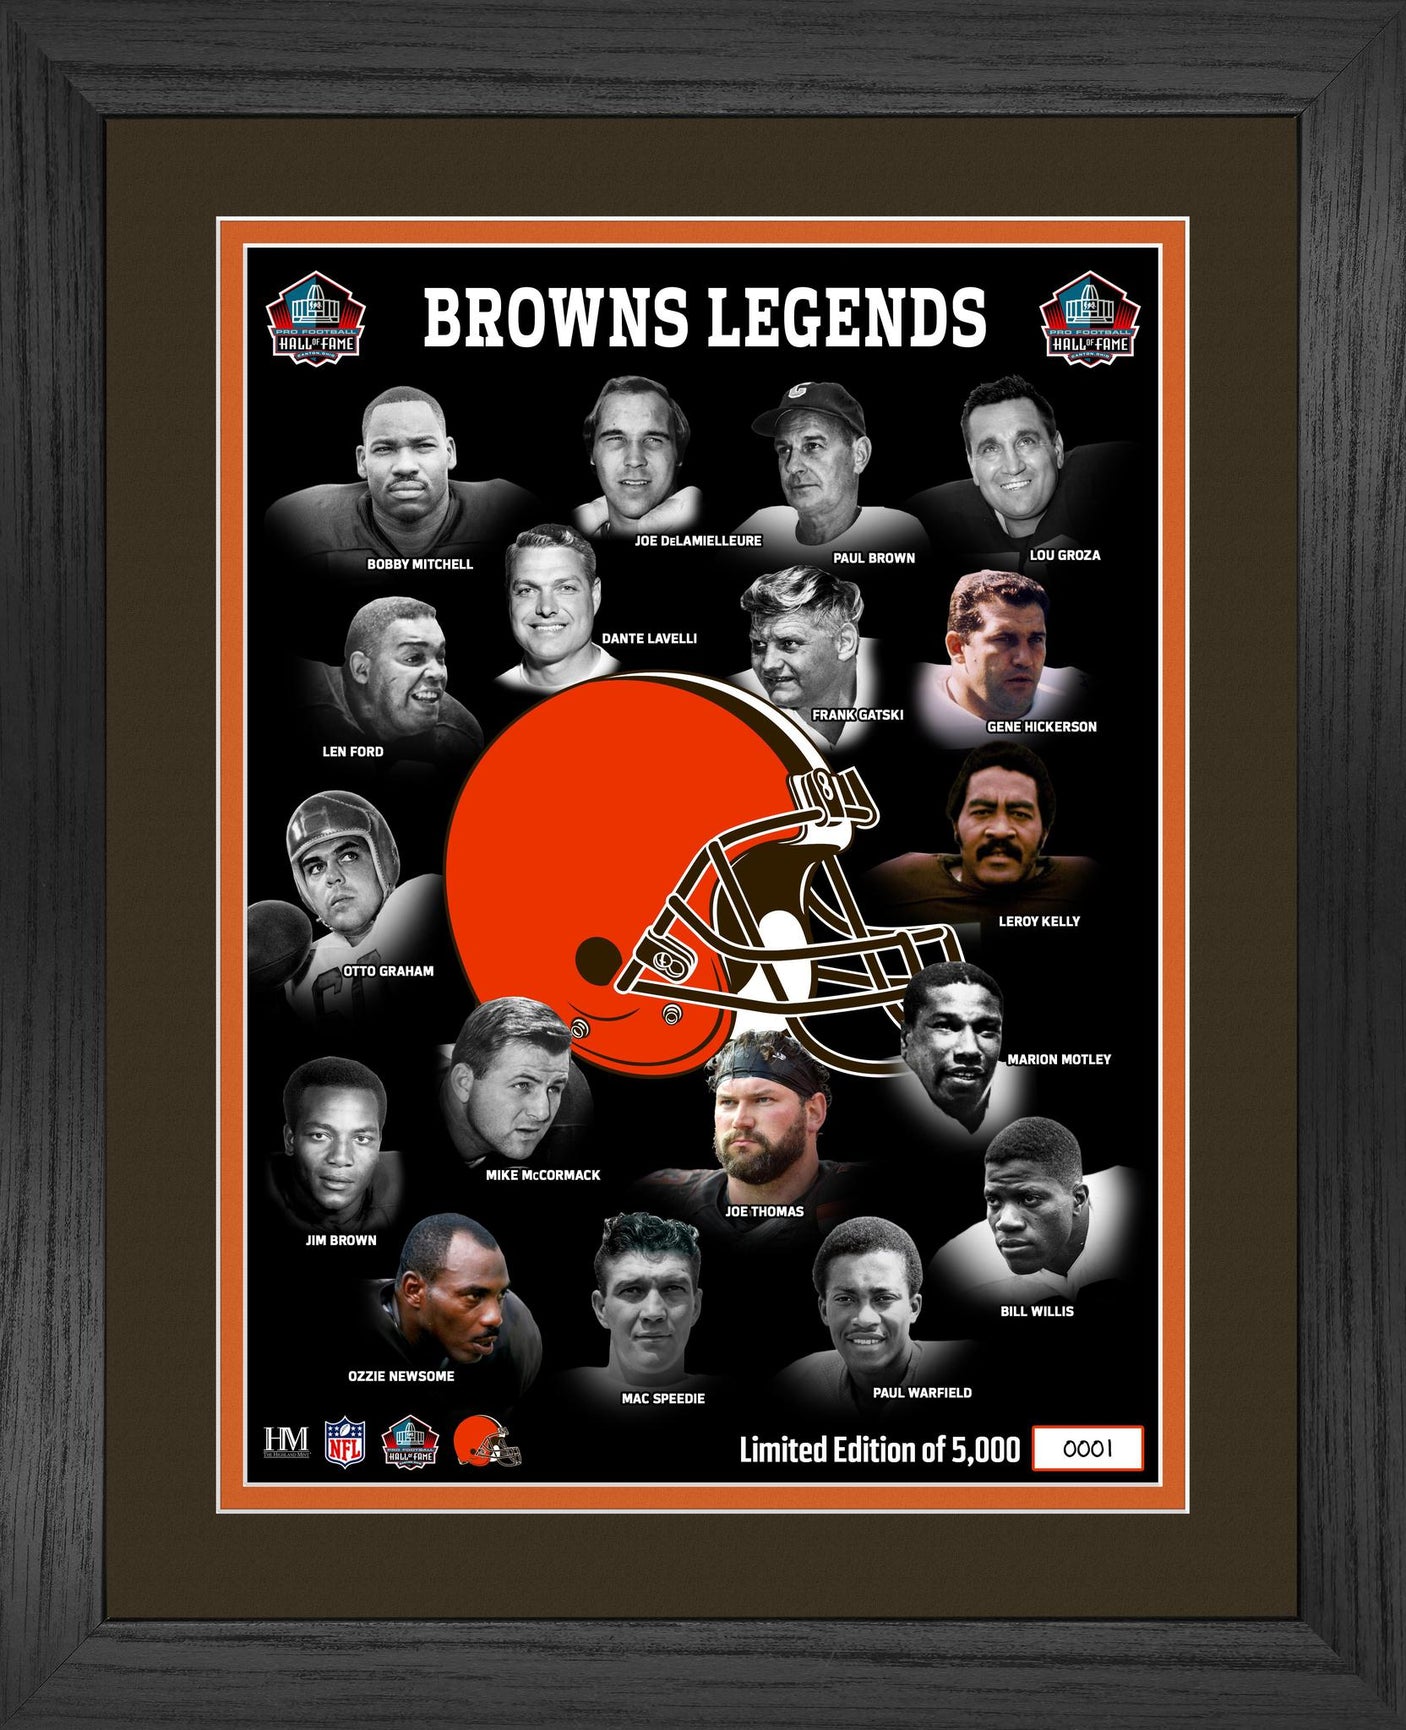 Browns Hall of Fame Legends 11x17 Photo Mint